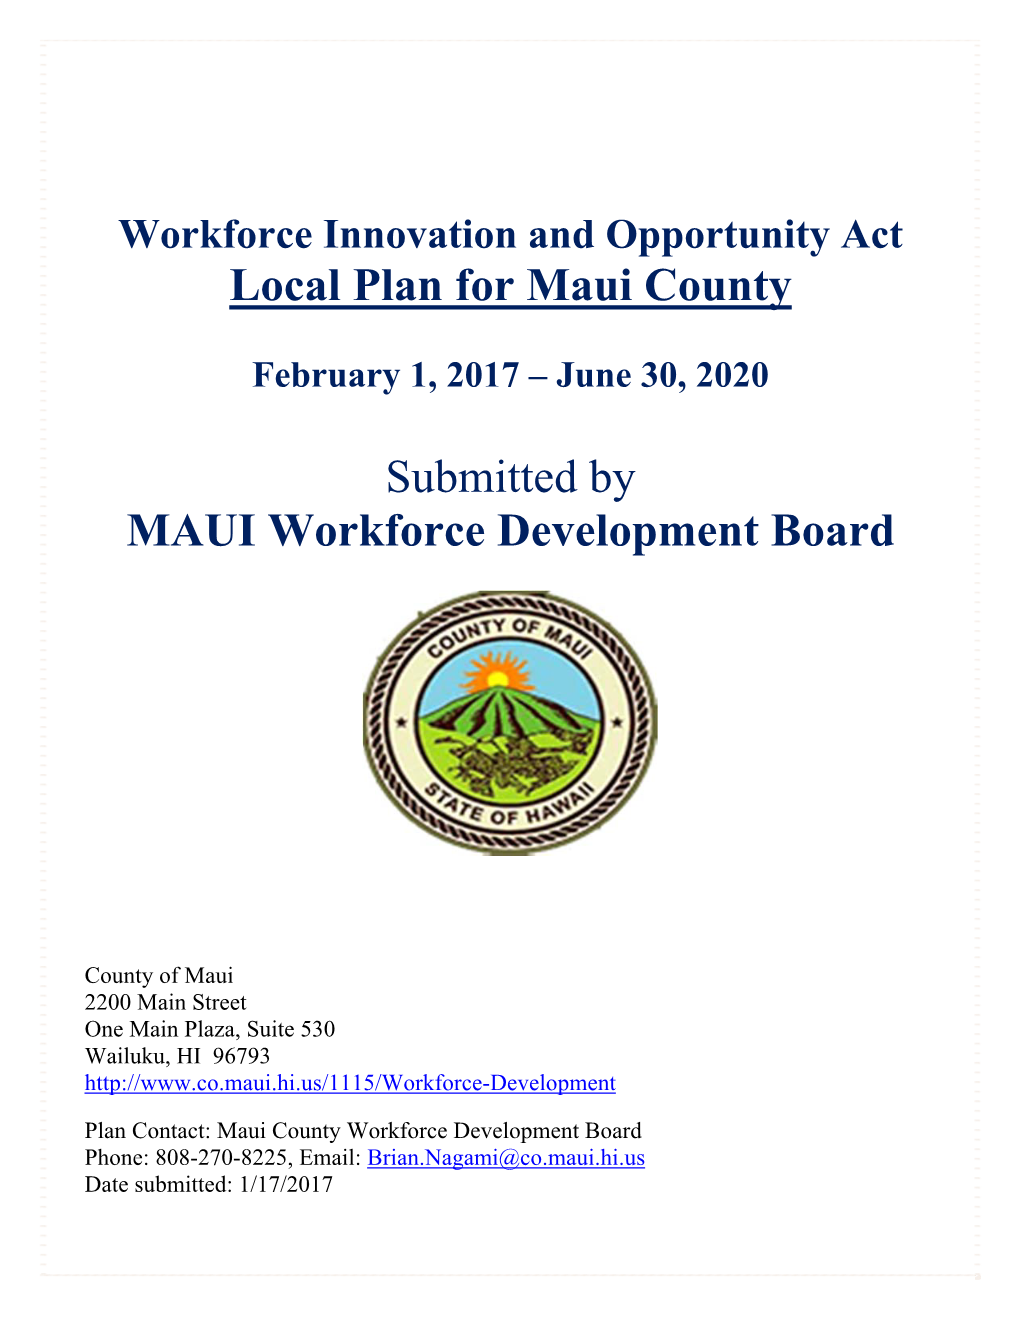 Local Plan for Maui County Submitted by MAUI Workforce Development